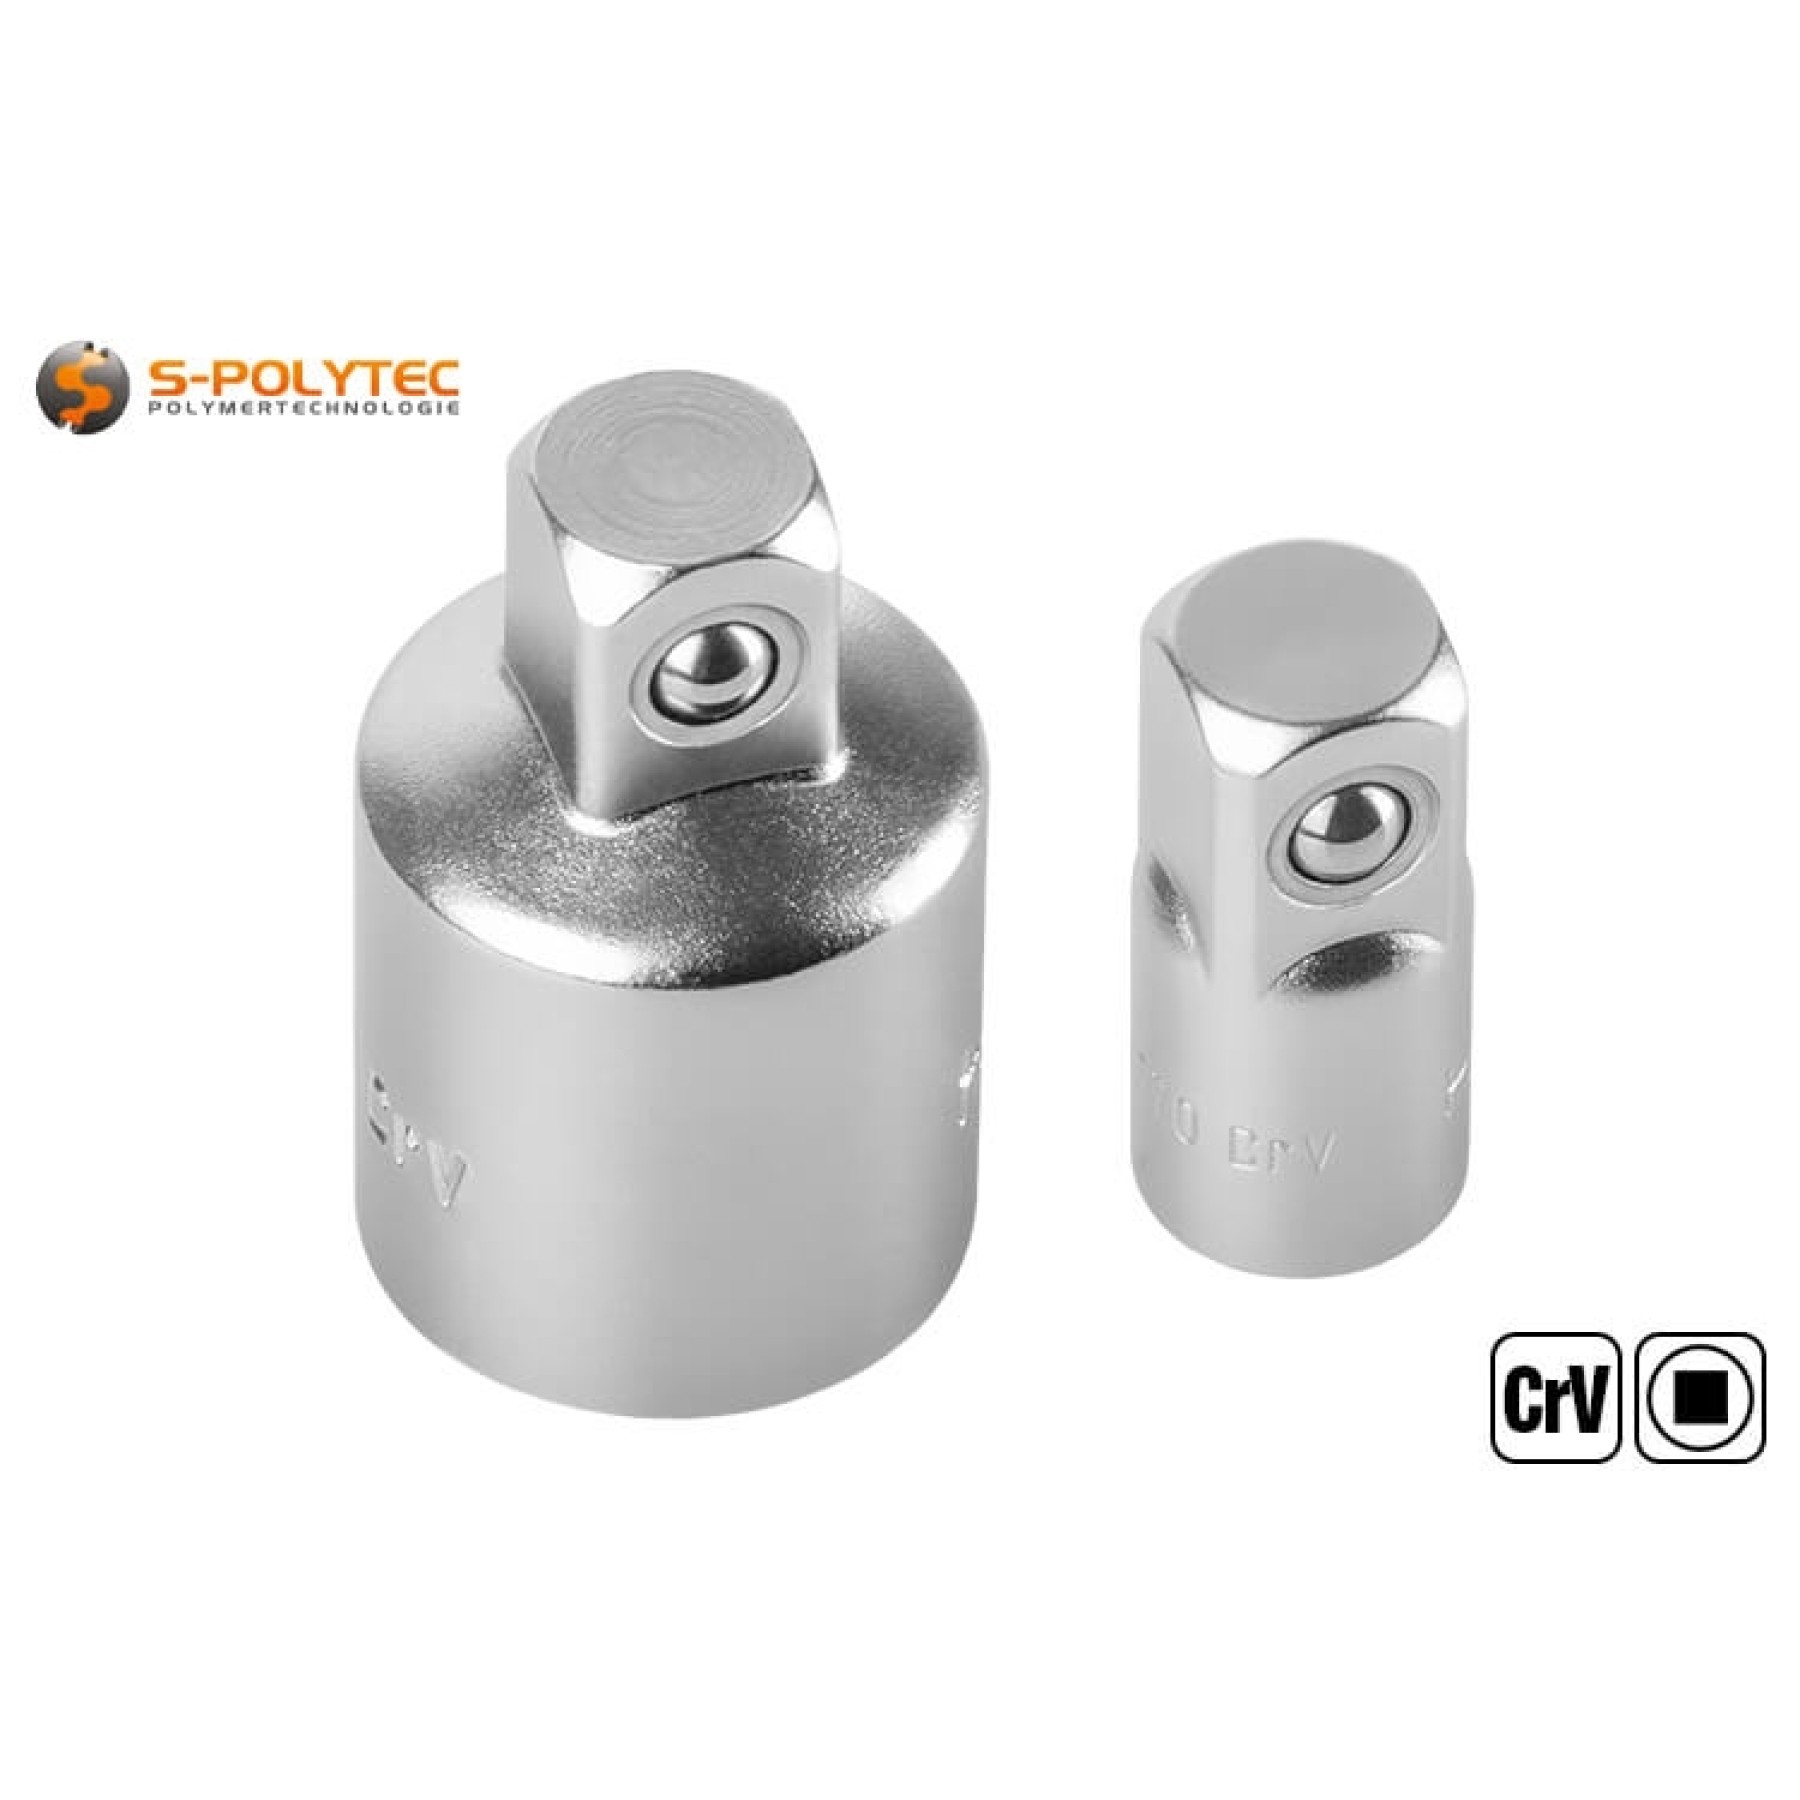 Socket adapter from 1/4 inch or 1/2 inch to 3/8 inch made of chrome vanadium steel with spring-loaded ball lock